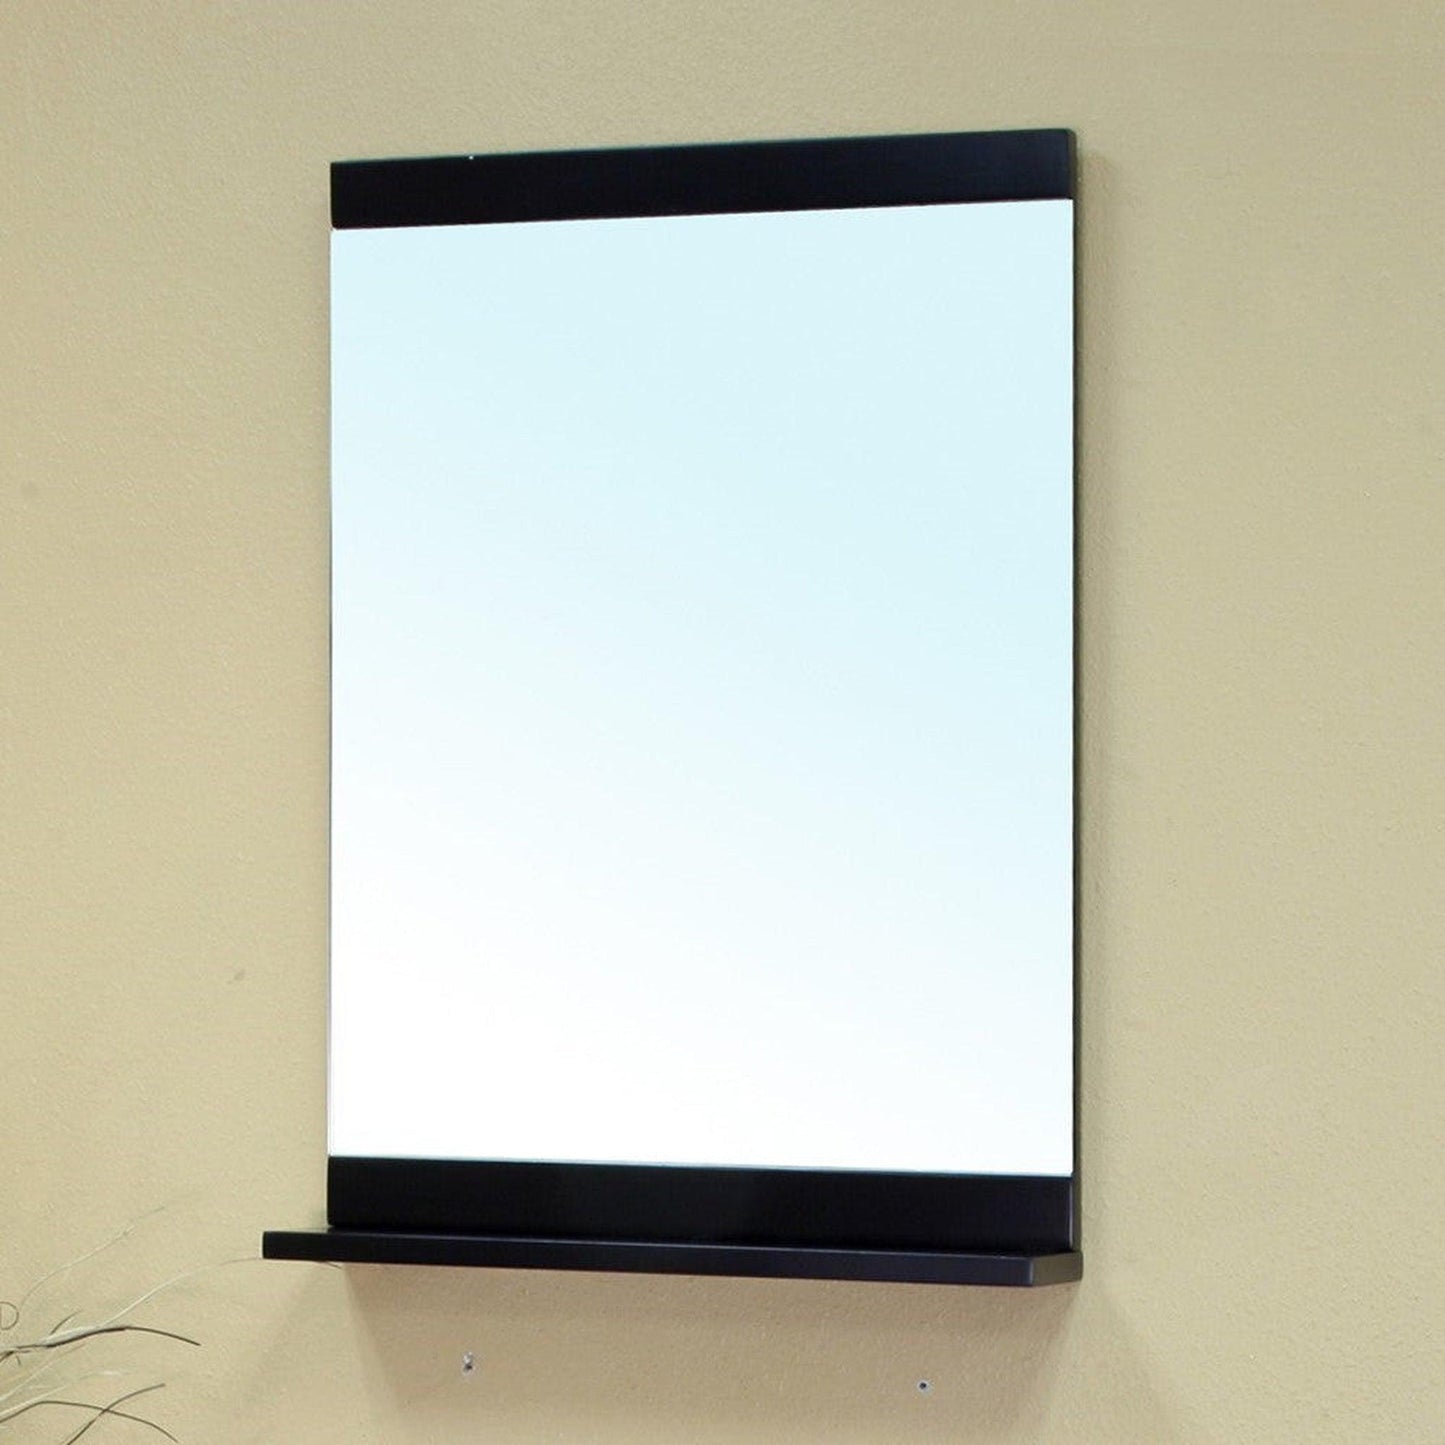 Bellaterra Home 22" x 32" Black Rectangle Wall-Mounted Solid Wood Framed Mirror